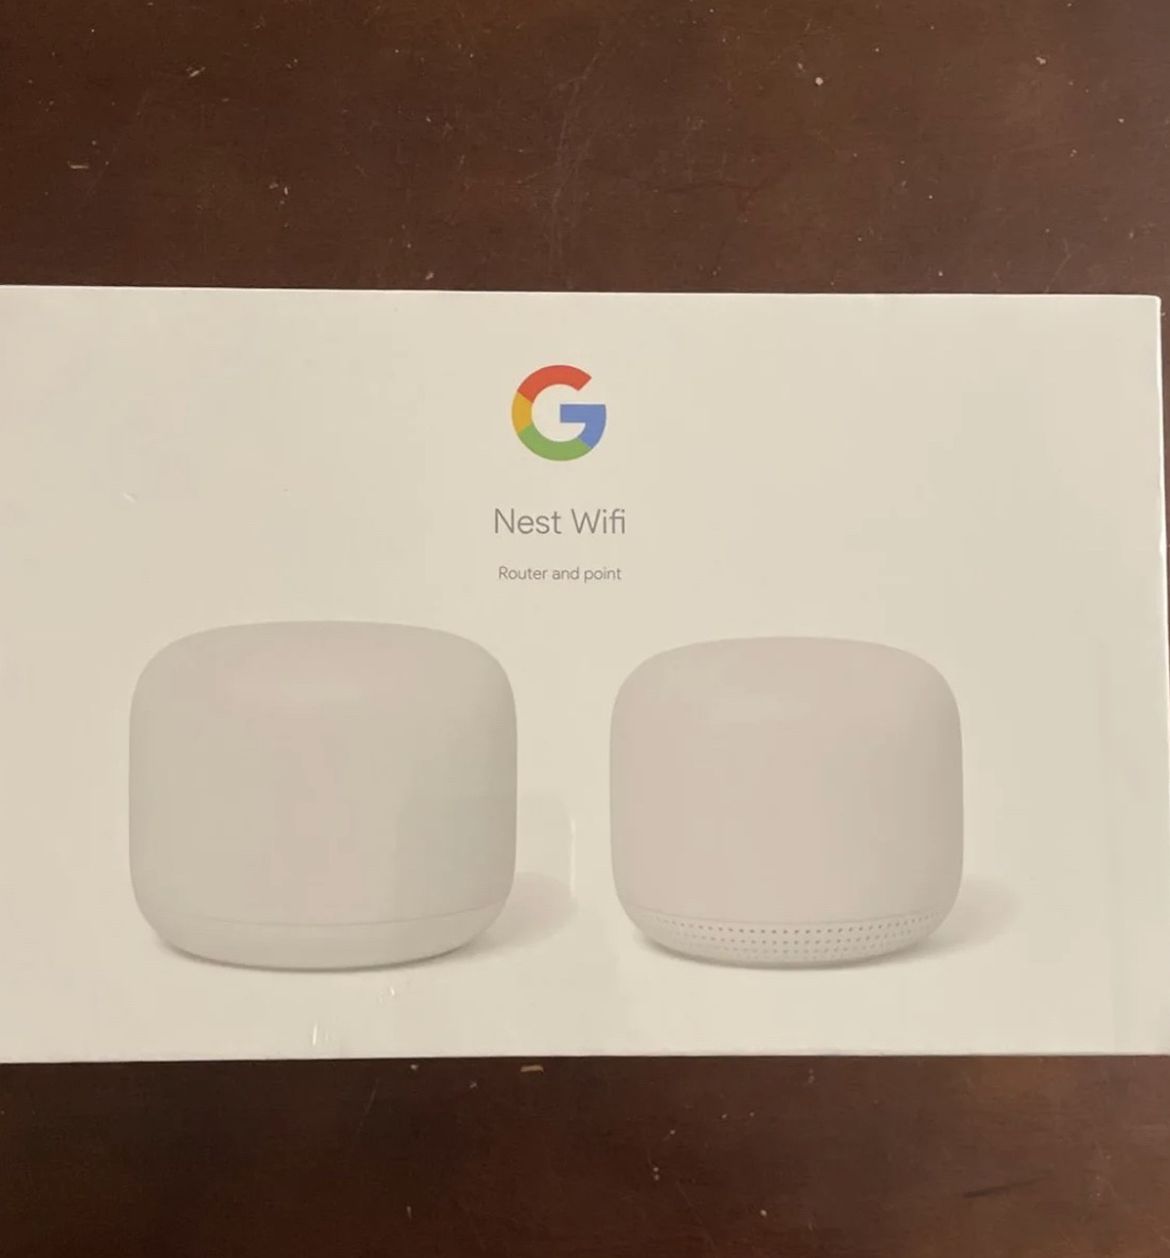 Google Nest Router And Pointer